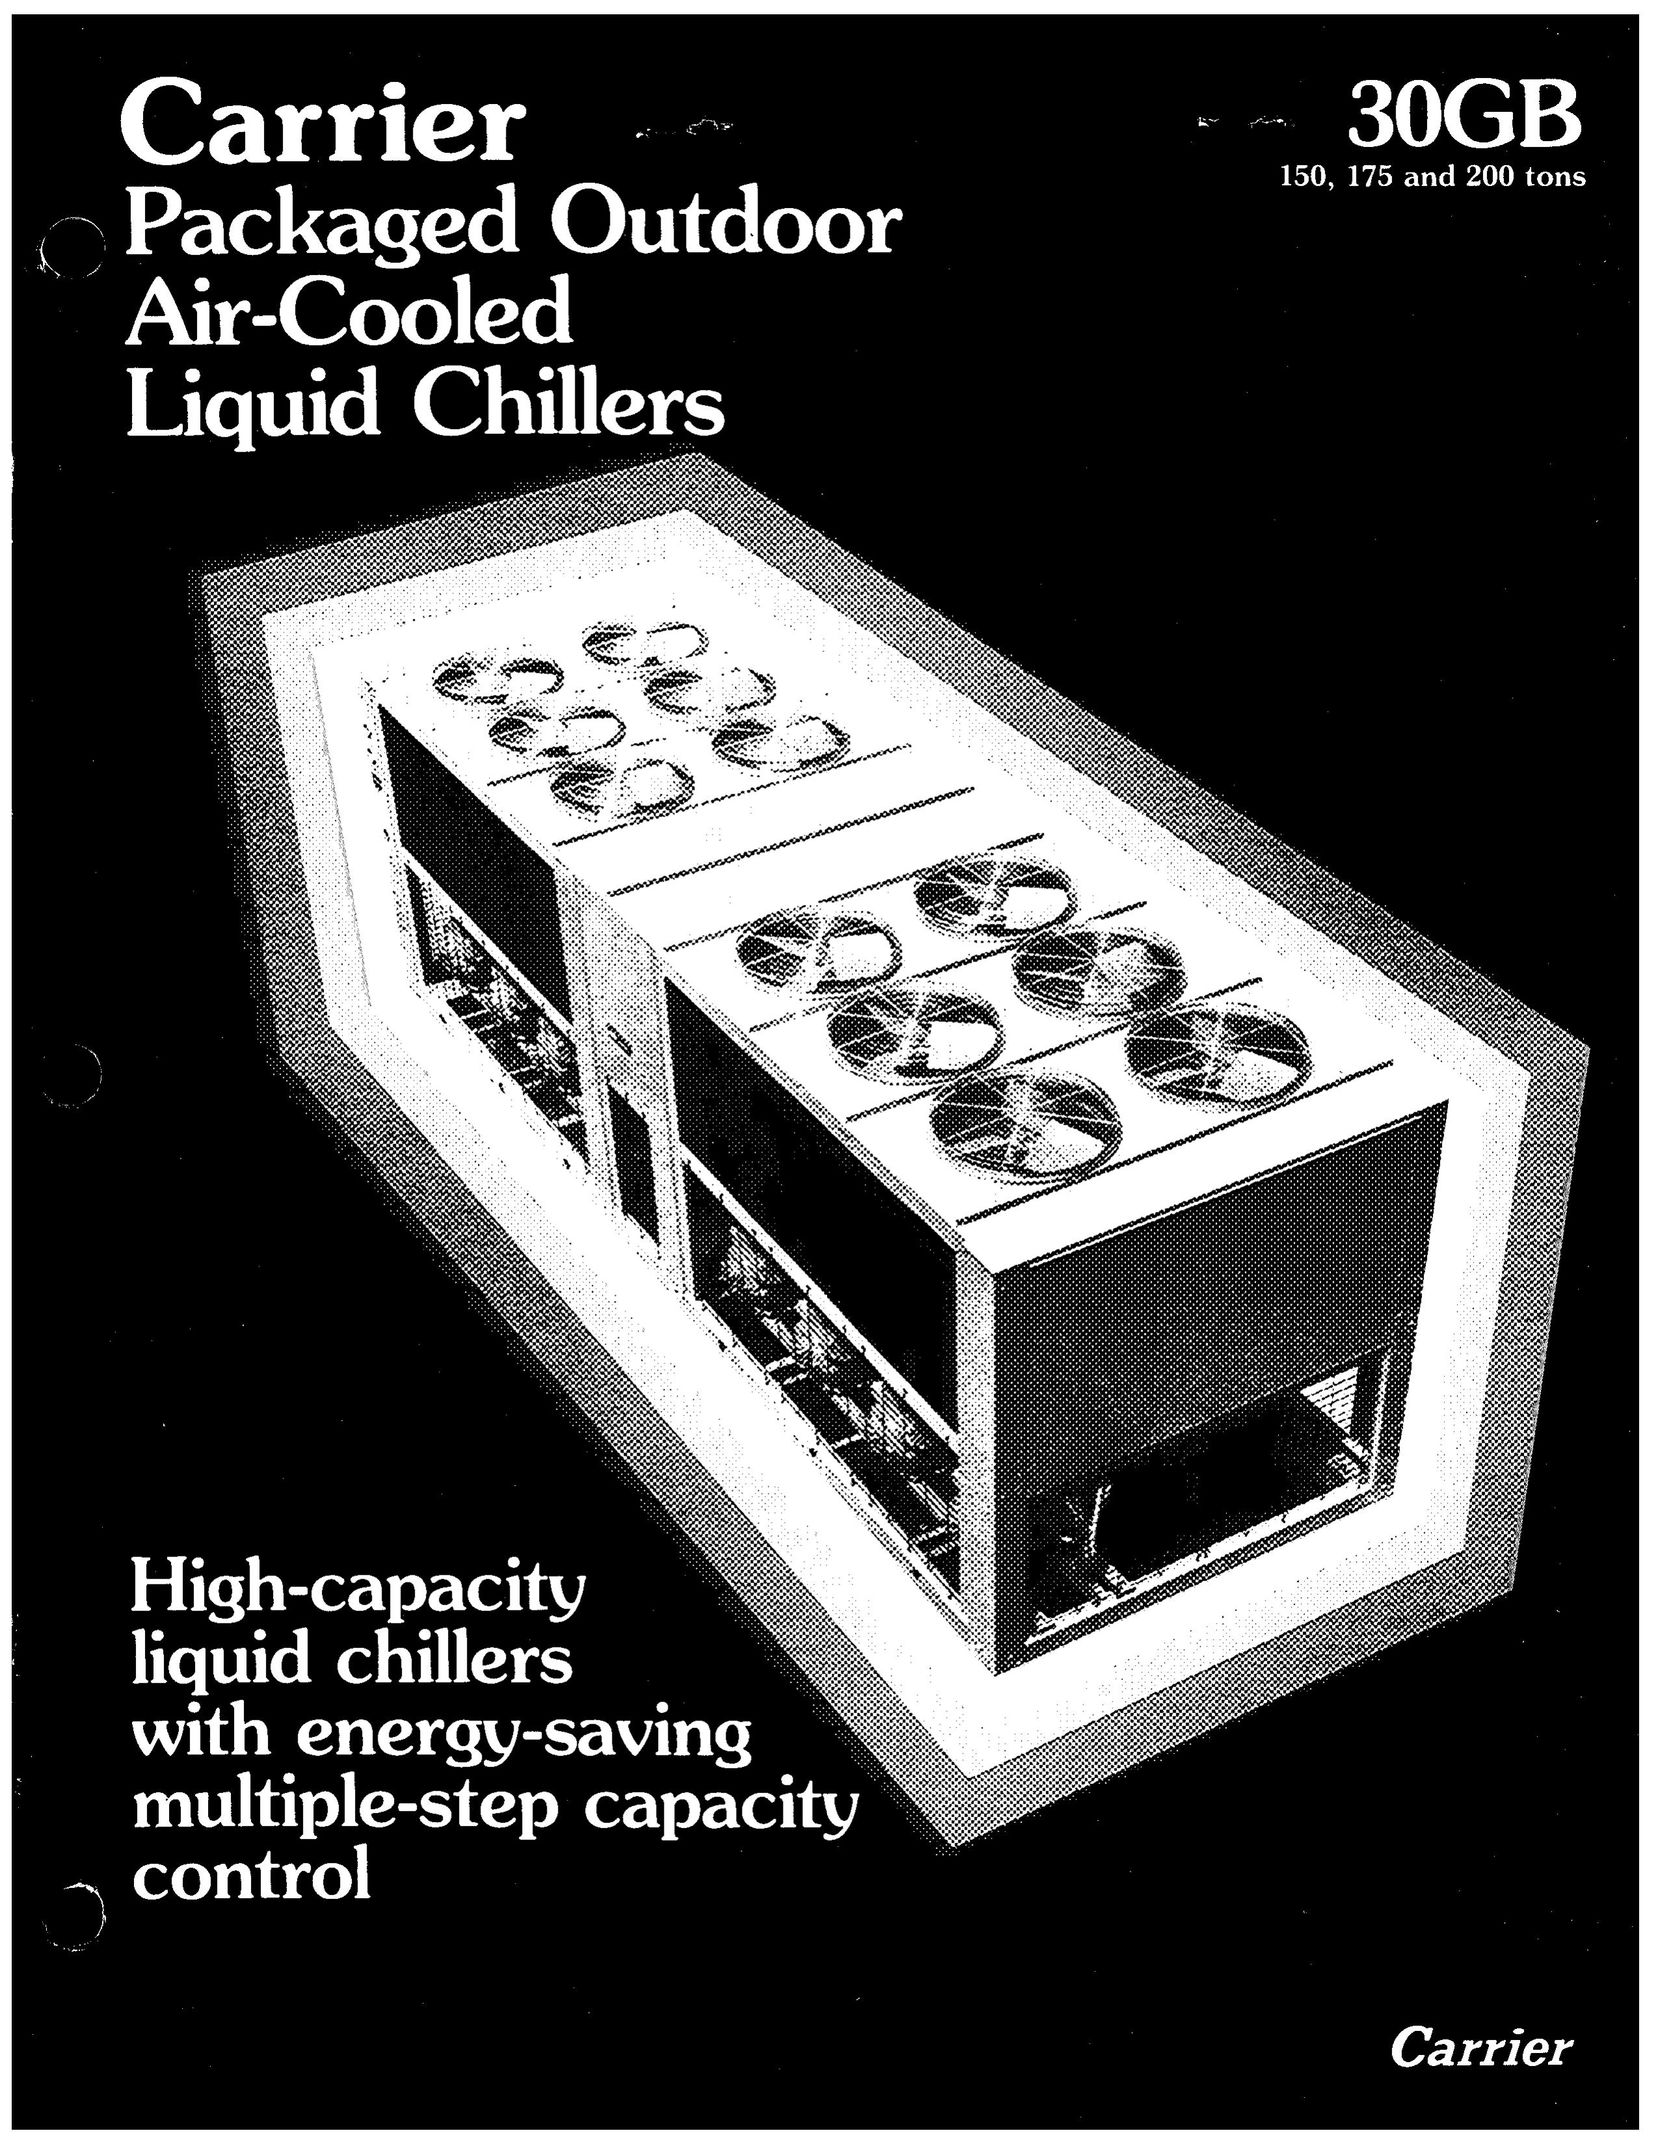 Carrier 30GB Air Conditioner User Manual